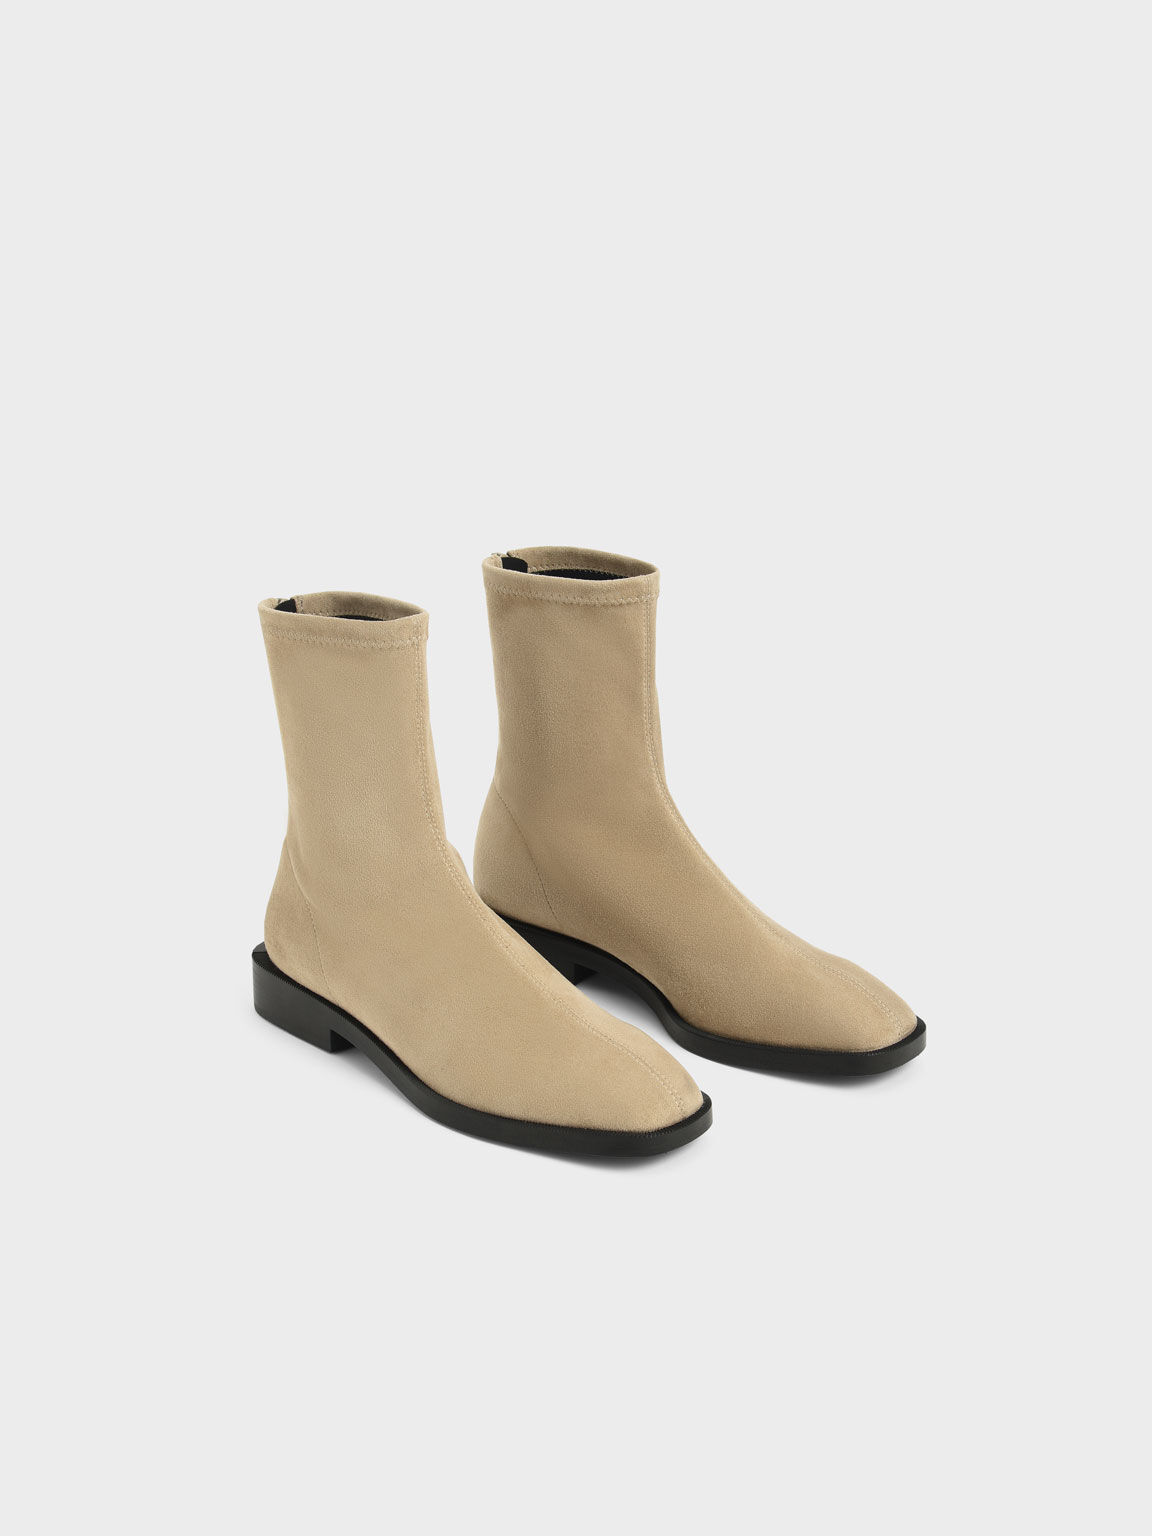 Textured Square Toe Zip-Up Ankle Boots, Taupe, hi-res